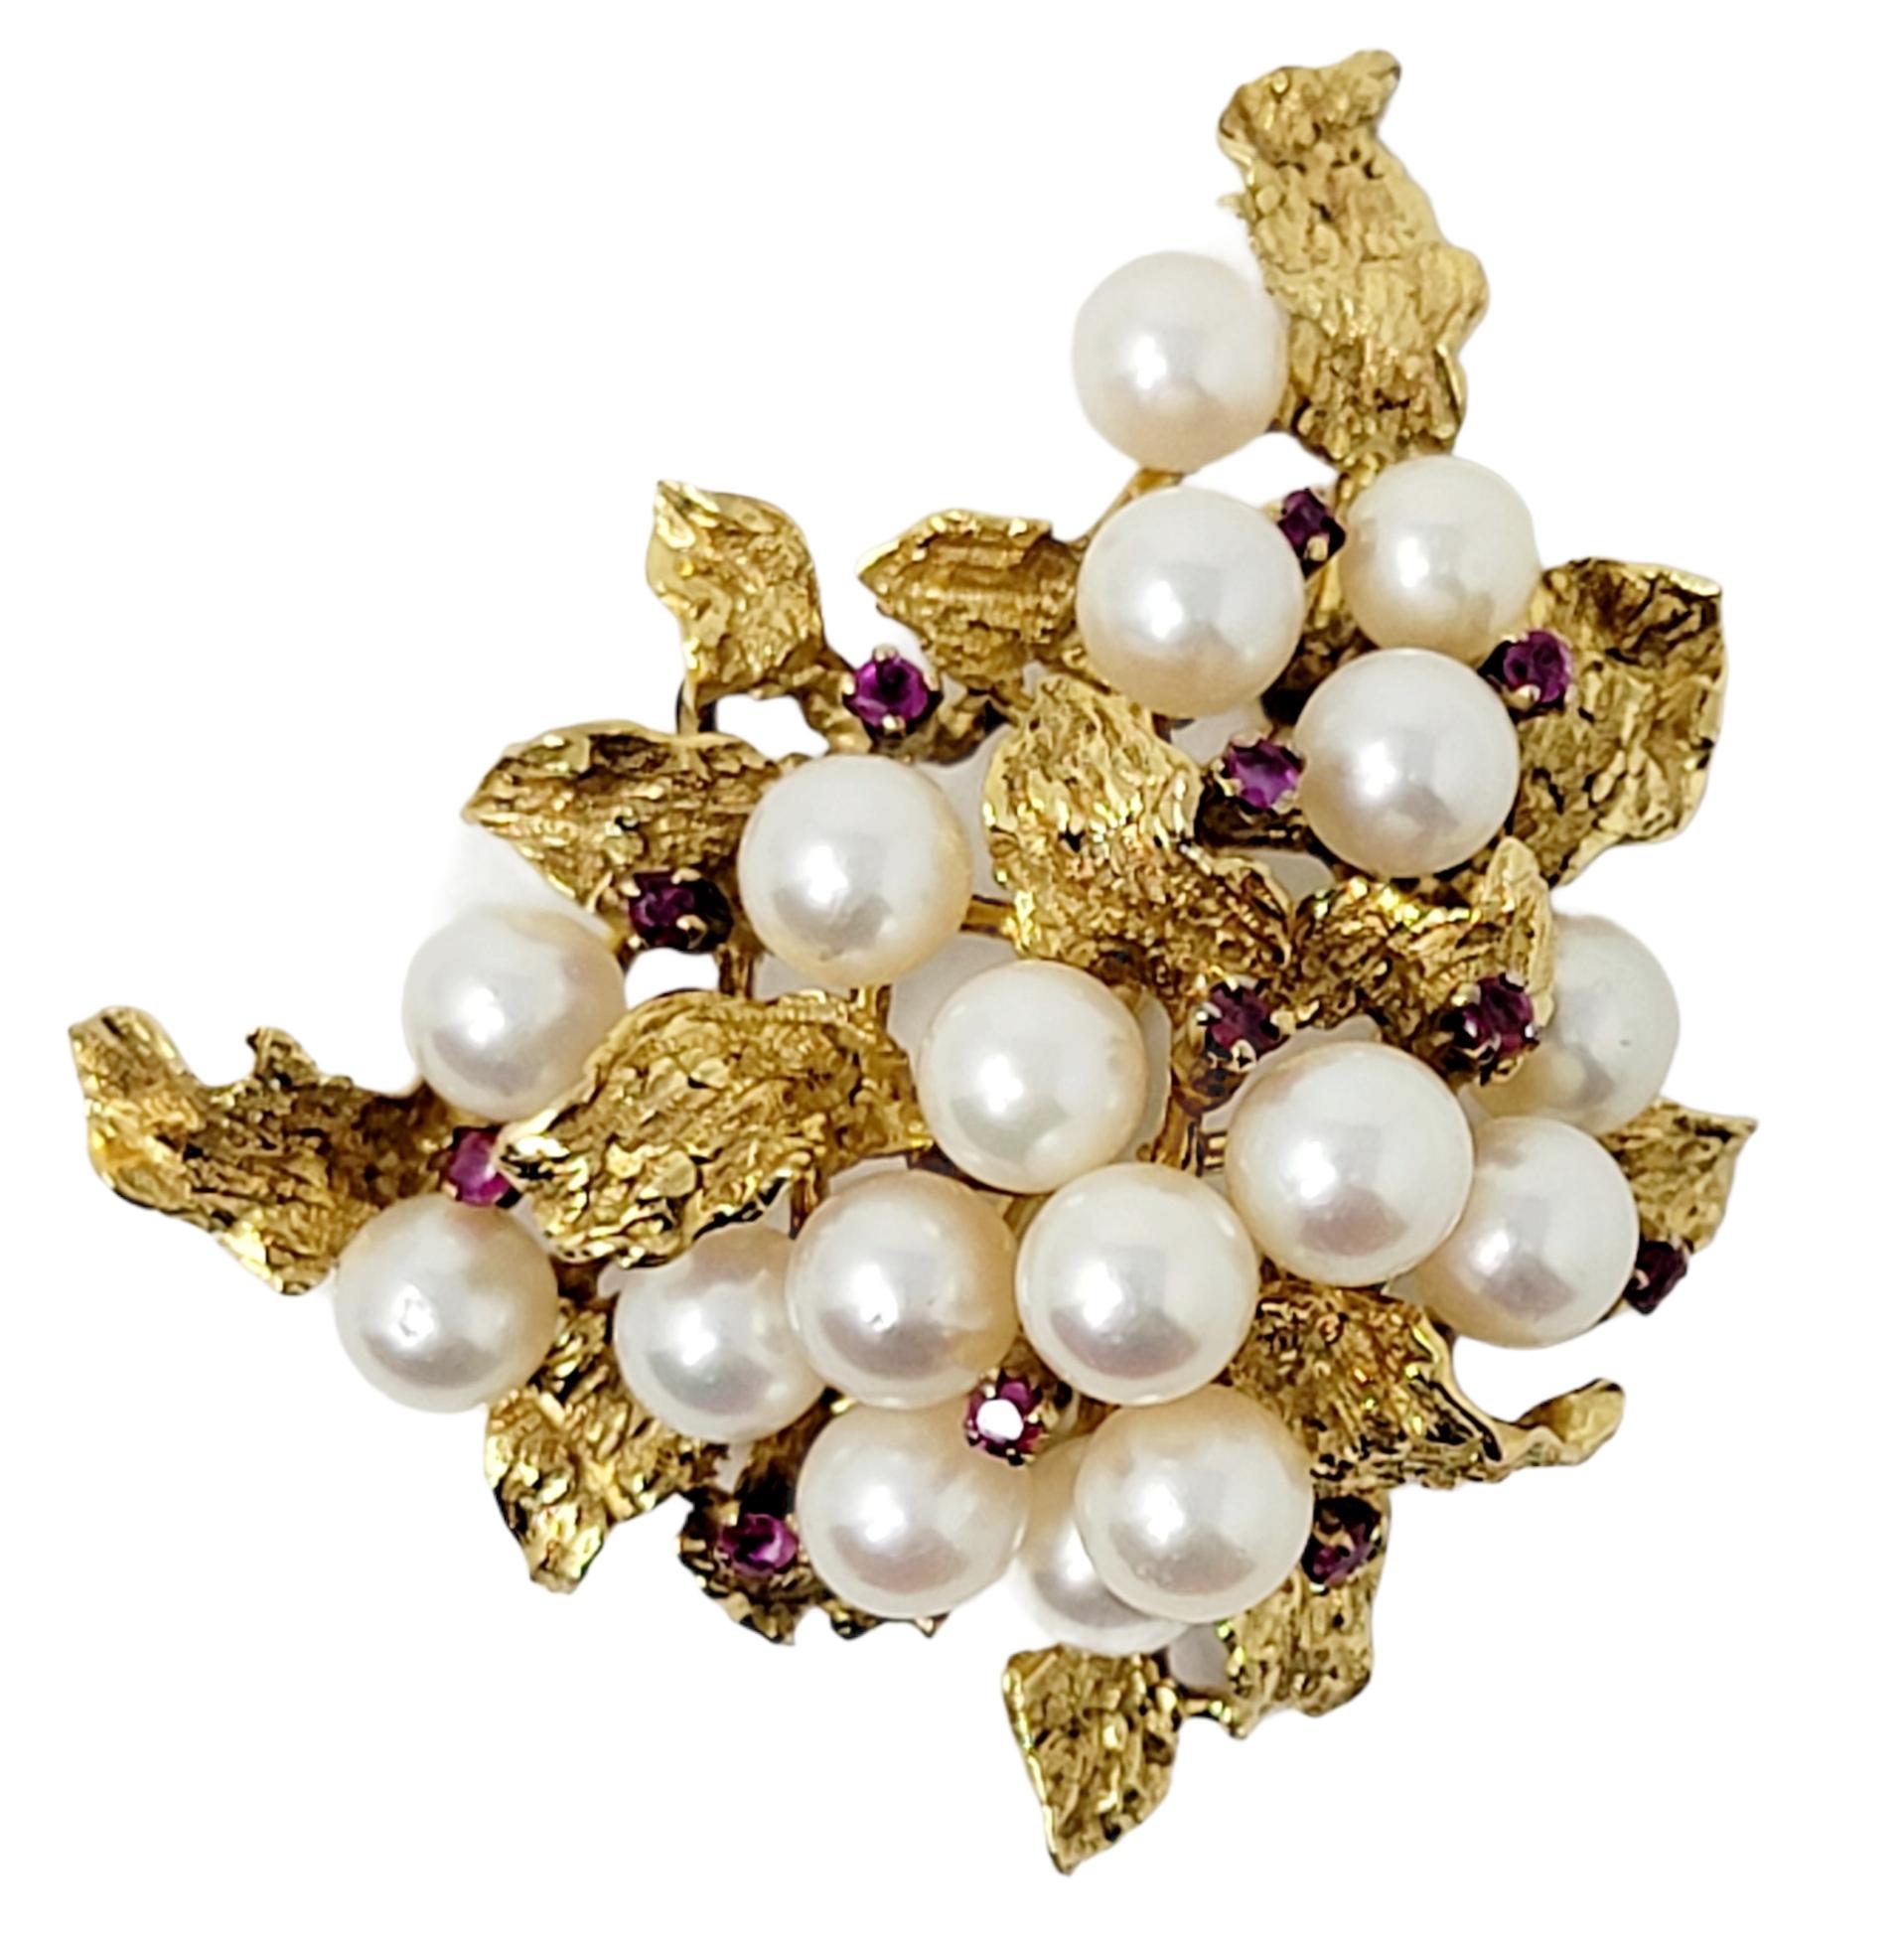 Vintage 14 Karat Yellow Gold Large Leaf Cluster Brooch with Pearls and Rubies For Sale 1